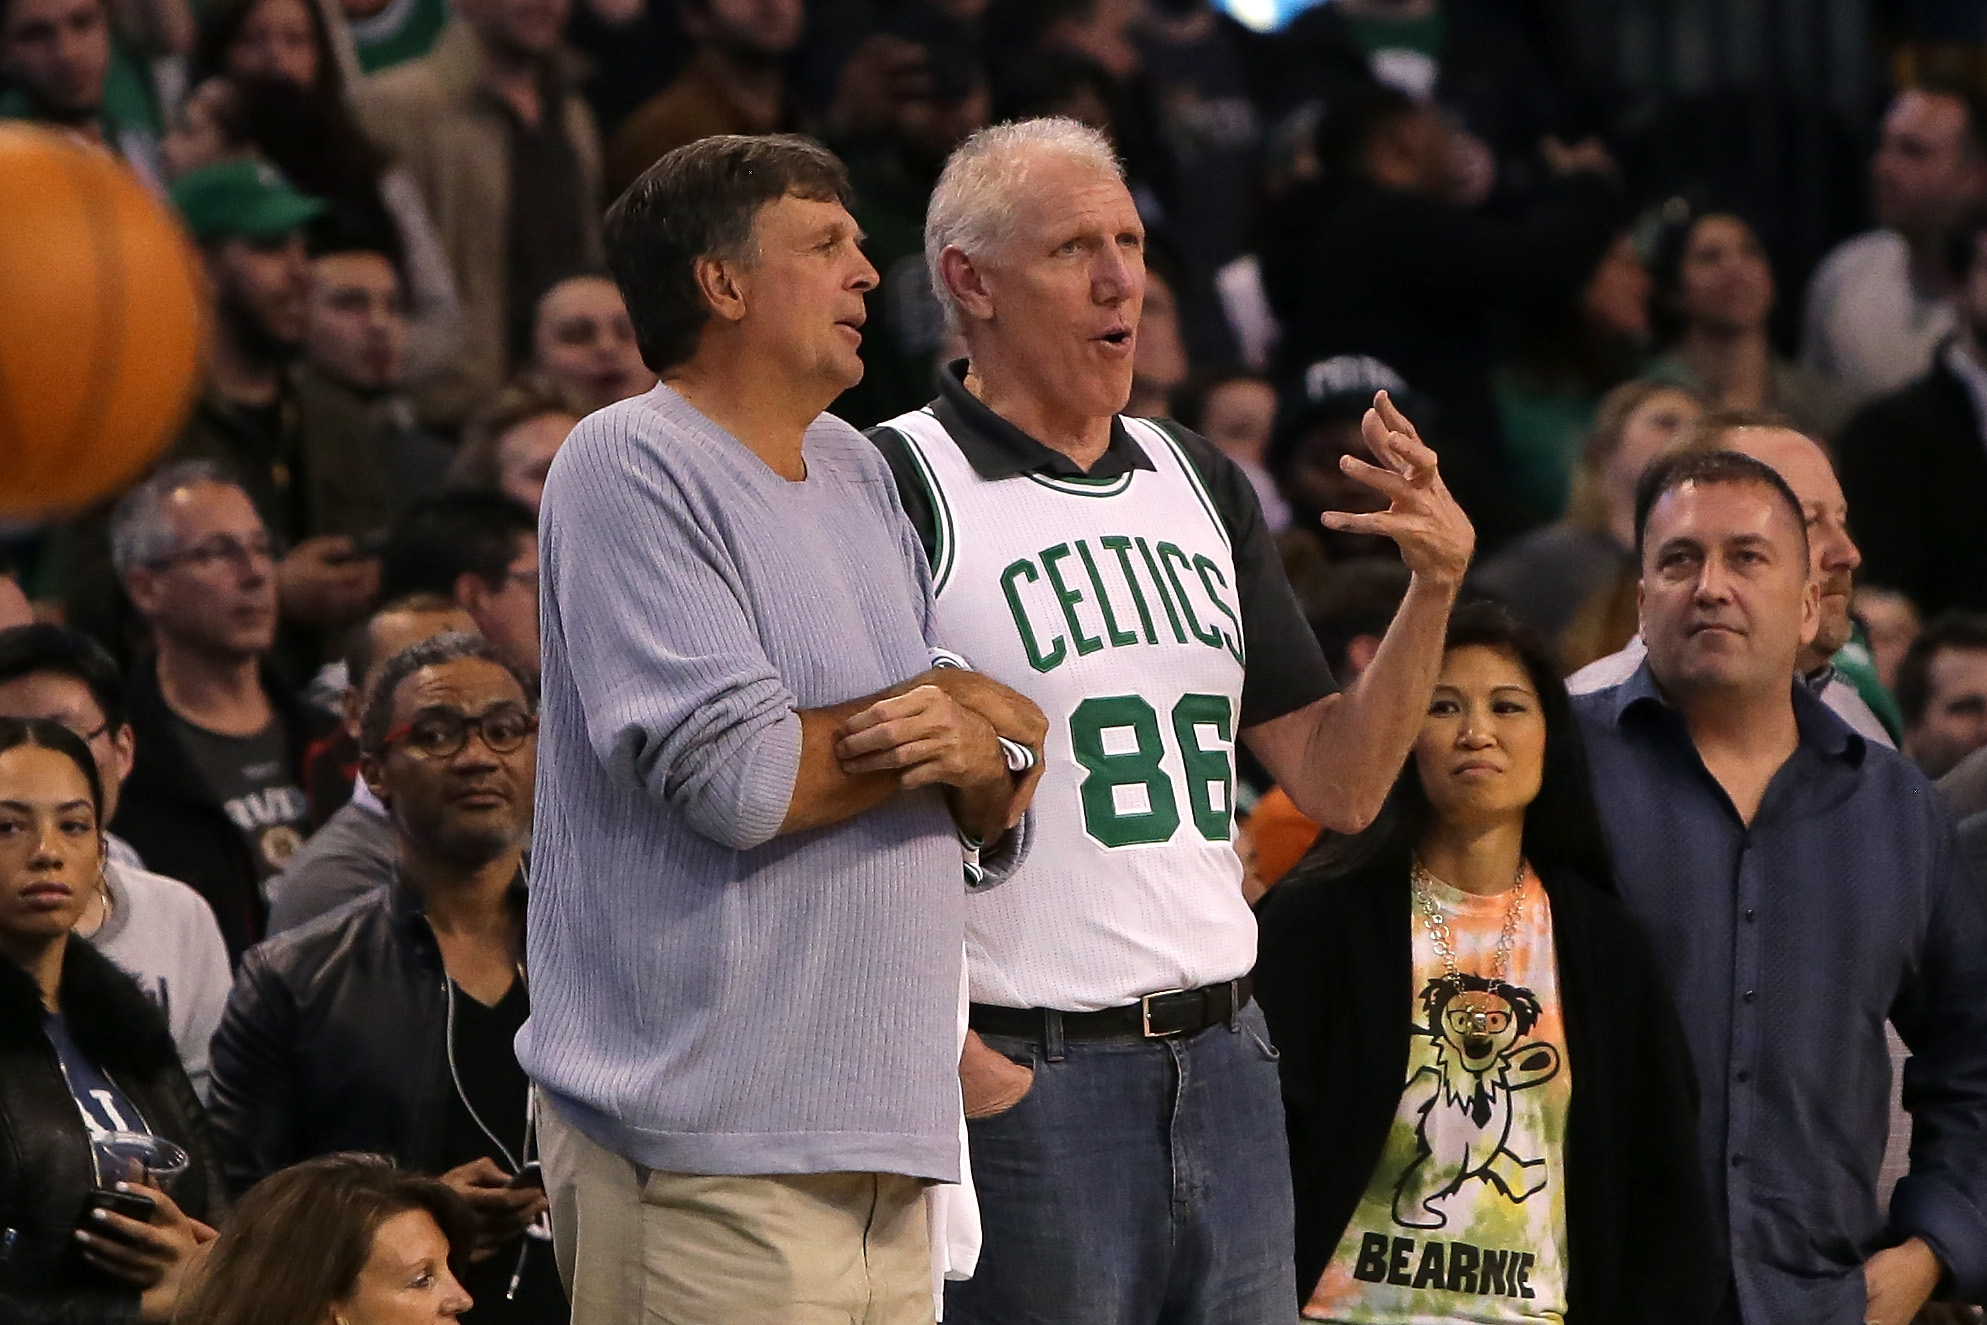 Members of the Boston Celtics 1986 Championship team Kevin McHale and Bill Walton look on in the game against the Miami Heat at TD Garden on April 13, 2016.